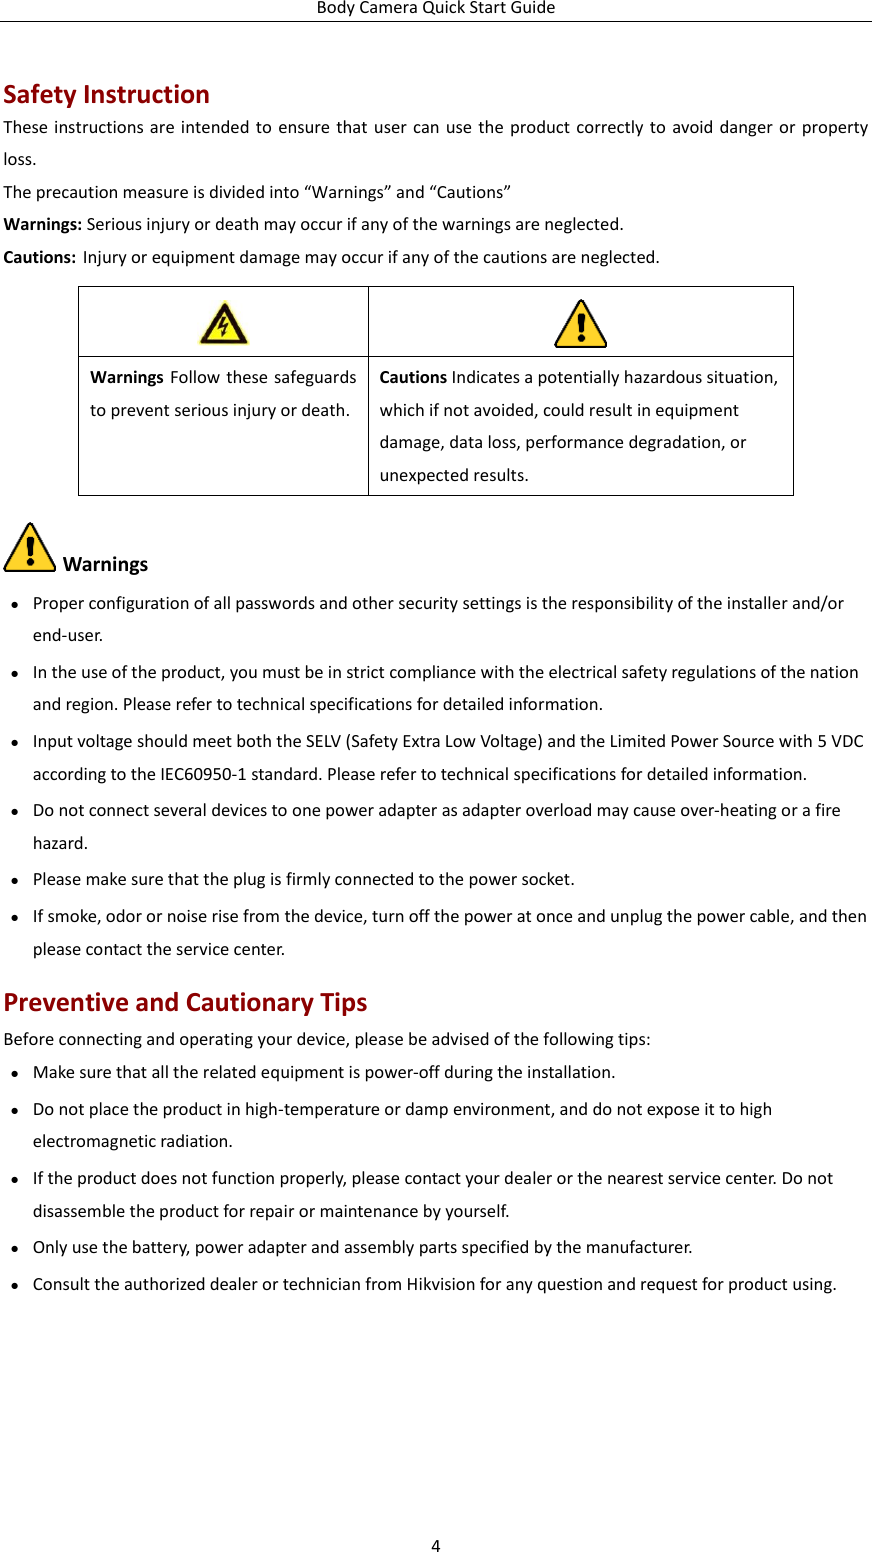 Body Camera Quick Start Guide 4 Safety Instruction These instructions are intended  to  ensure that user can  use  the  product correctly to  avoid danger or  property loss.   The precaution measure is divided into “Warnings” and “Cautions” Warnings: Serious injury or death may occur if any of the warnings are neglected. Cautions: Injury or equipment damage may occur if any of the cautions are neglected.      Warnings ● Proper configuration of all passwords and other security settings is the responsibility of the installer and/or end-user. ● In the use of the product, you must be in strict compliance with the electrical safety regulations of the nation and region. Please refer to technical specifications for detailed information. ● Input voltage should meet both the SELV (Safety Extra Low Voltage) and the Limited Power Source with 5 VDC according to the IEC60950-1 standard. Please refer to technical specifications for detailed information. ● Do not connect several devices to one power adapter as adapter overload may cause over-heating or a fire hazard. ● Please make sure that the plug is firmly connected to the power socket.     ● If smoke, odor or noise rise from the device, turn off the power at once and unplug the power cable, and then please contact the service center.   Preventive and Cautionary Tips Before connecting and operating your device, please be advised of the following tips: ● Make sure that all the related equipment is power-off during the installation. ● Do not place the product in high-temperature or damp environment, and do not expose it to high electromagnetic radiation. ● If the product does not function properly, please contact your dealer or the nearest service center. Do not disassemble the product for repair or maintenance by yourself. ● Only use the battery, power adapter and assembly parts specified by the manufacturer. ● Consult the authorized dealer or technician from Hikvision for any question and request for product using.   Warnings Follow these safeguards to prevent serious injury or death. Cautions Indicates a potentially hazardous situation, which if not avoided, could result in equipment damage, data loss, performance degradation, or unexpected results. 